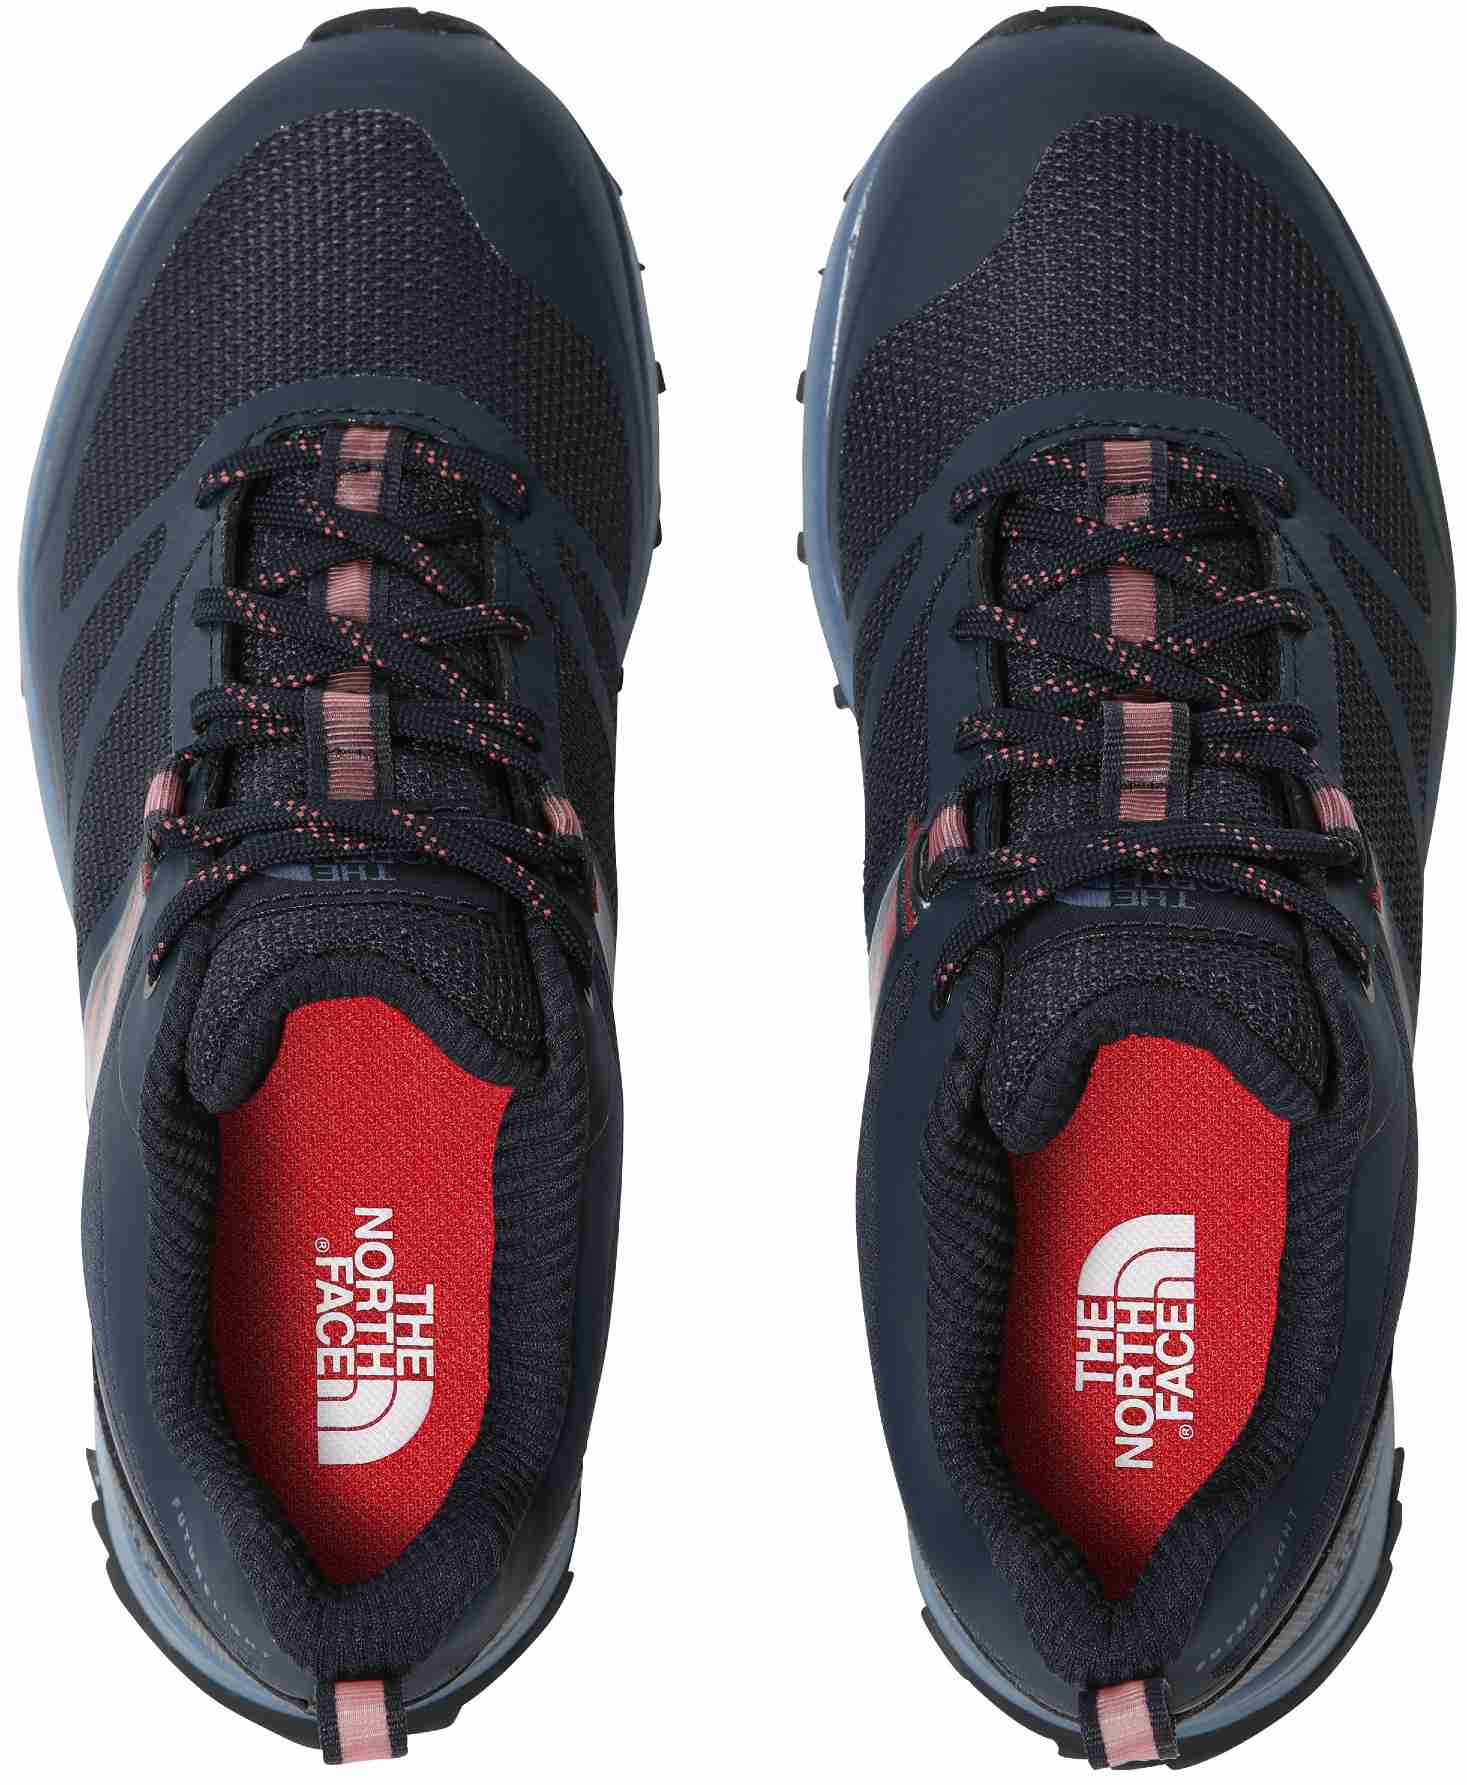 The North Face Litewave FutureLight Women's Hiking Shoes